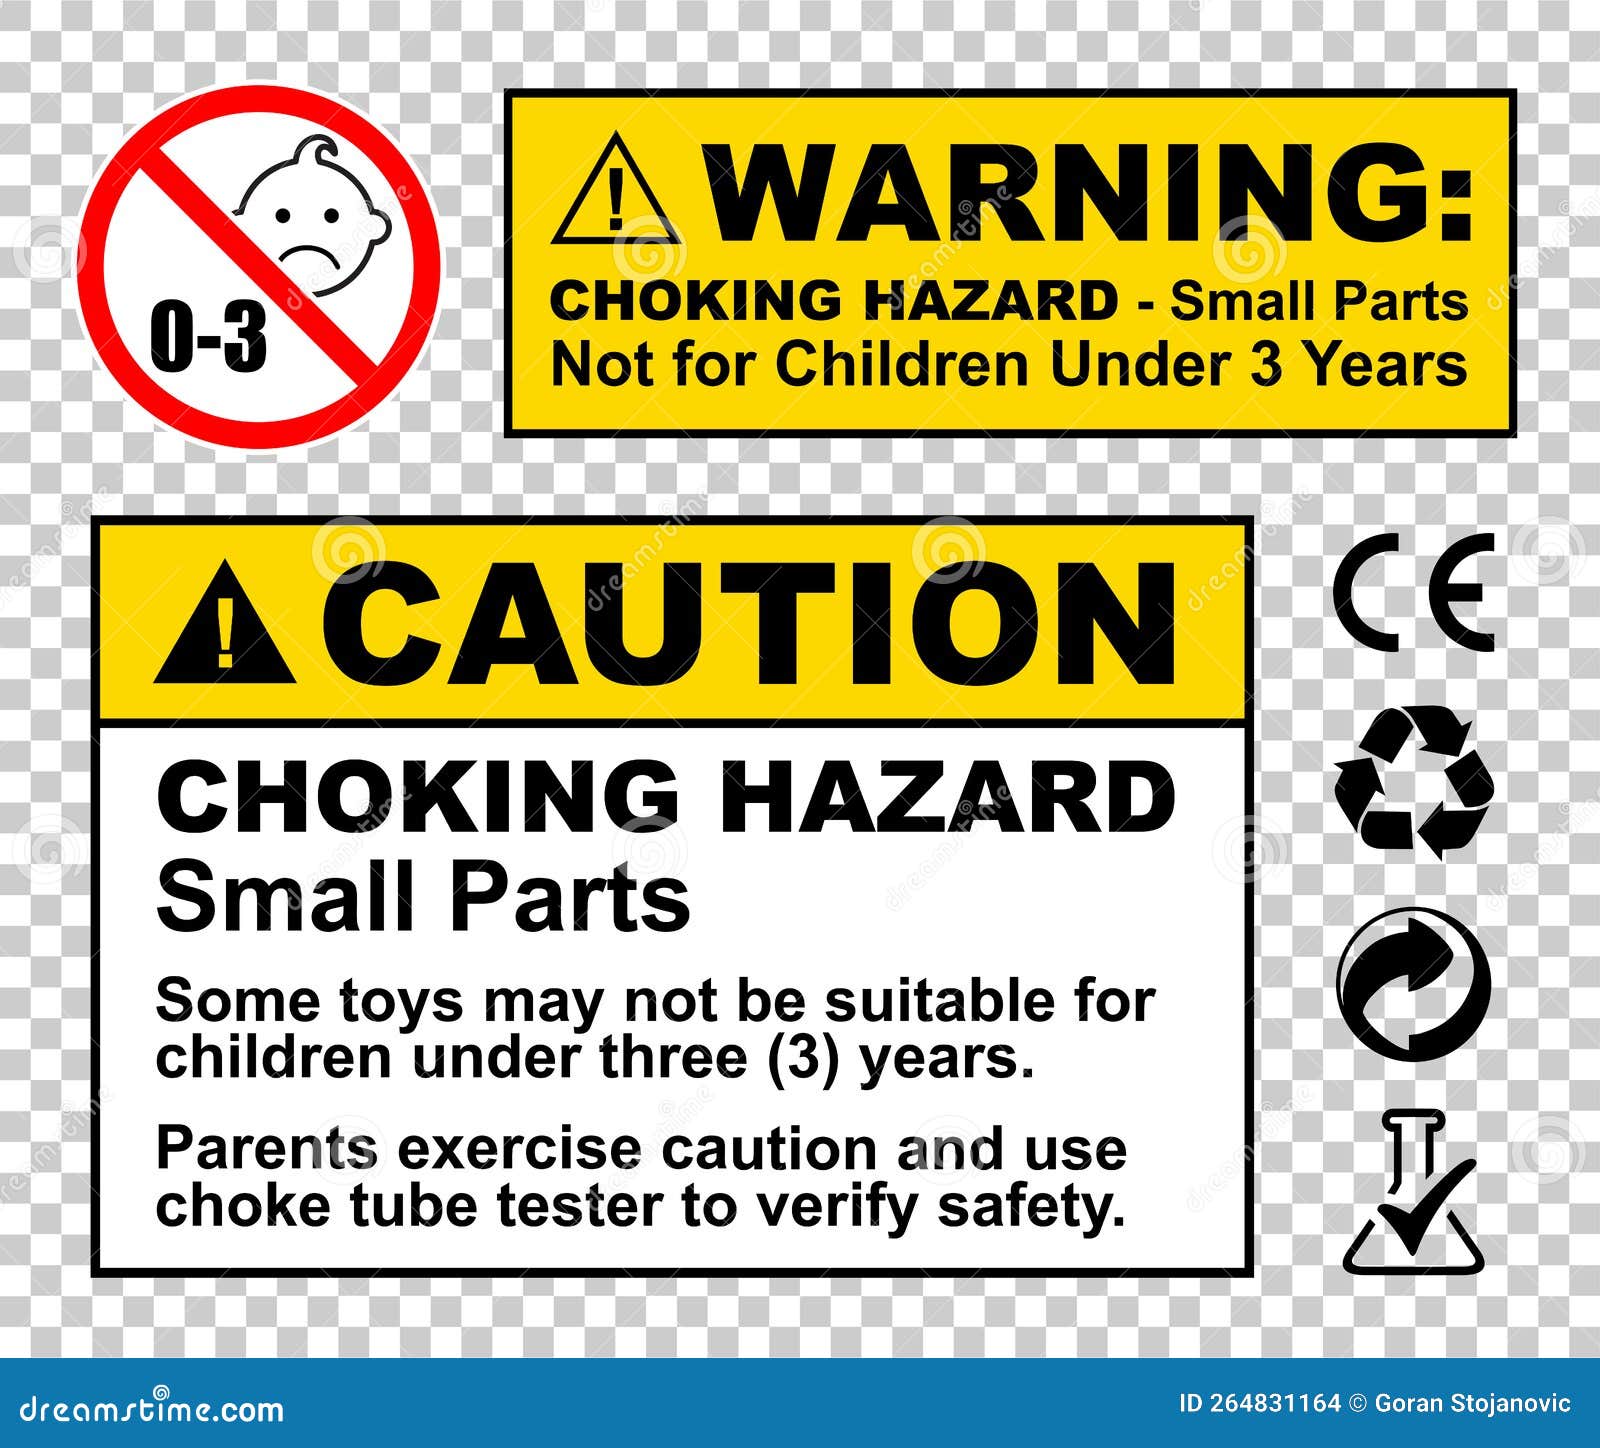 warning caution - choking hazard small parts - not suitable for children under 3 years s 0-3 ages sign  